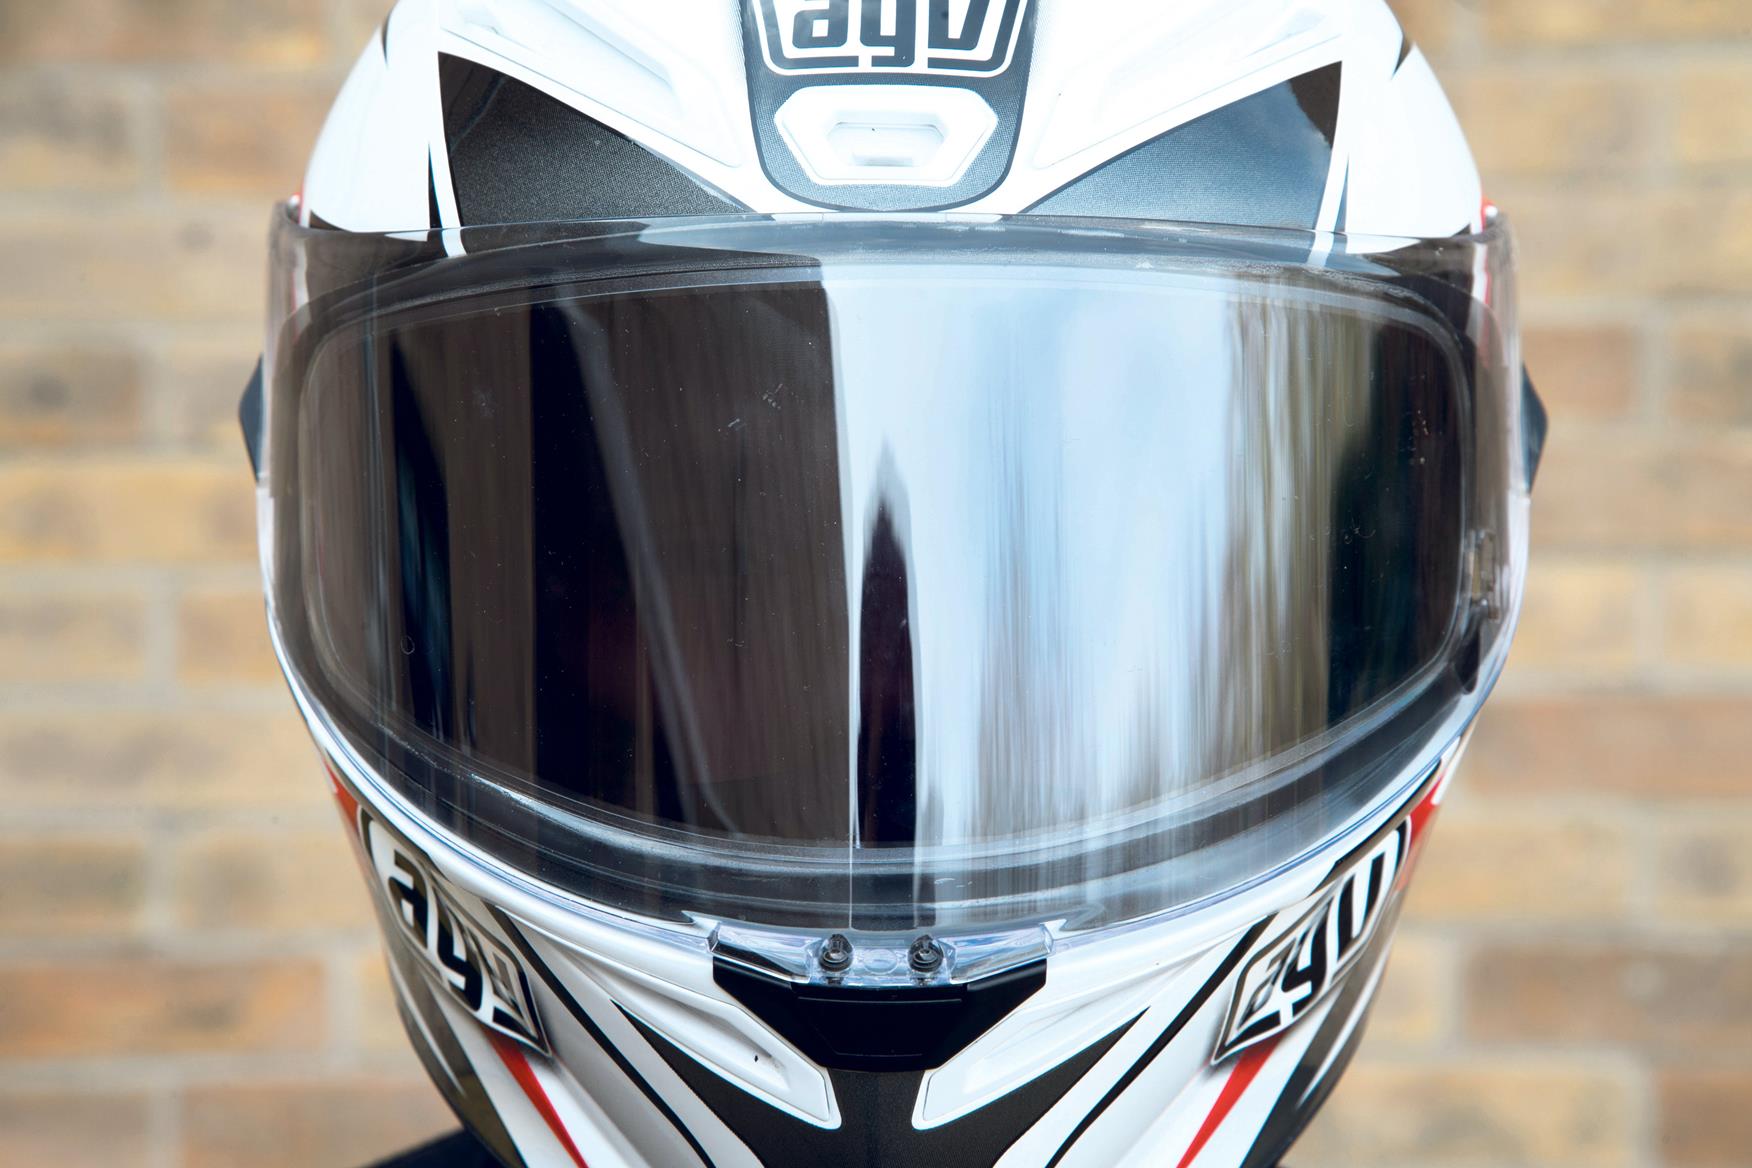 Visors for motorcycle helmets - Spare parts Visors for motorcycle helmets -  AGV (Official Website)